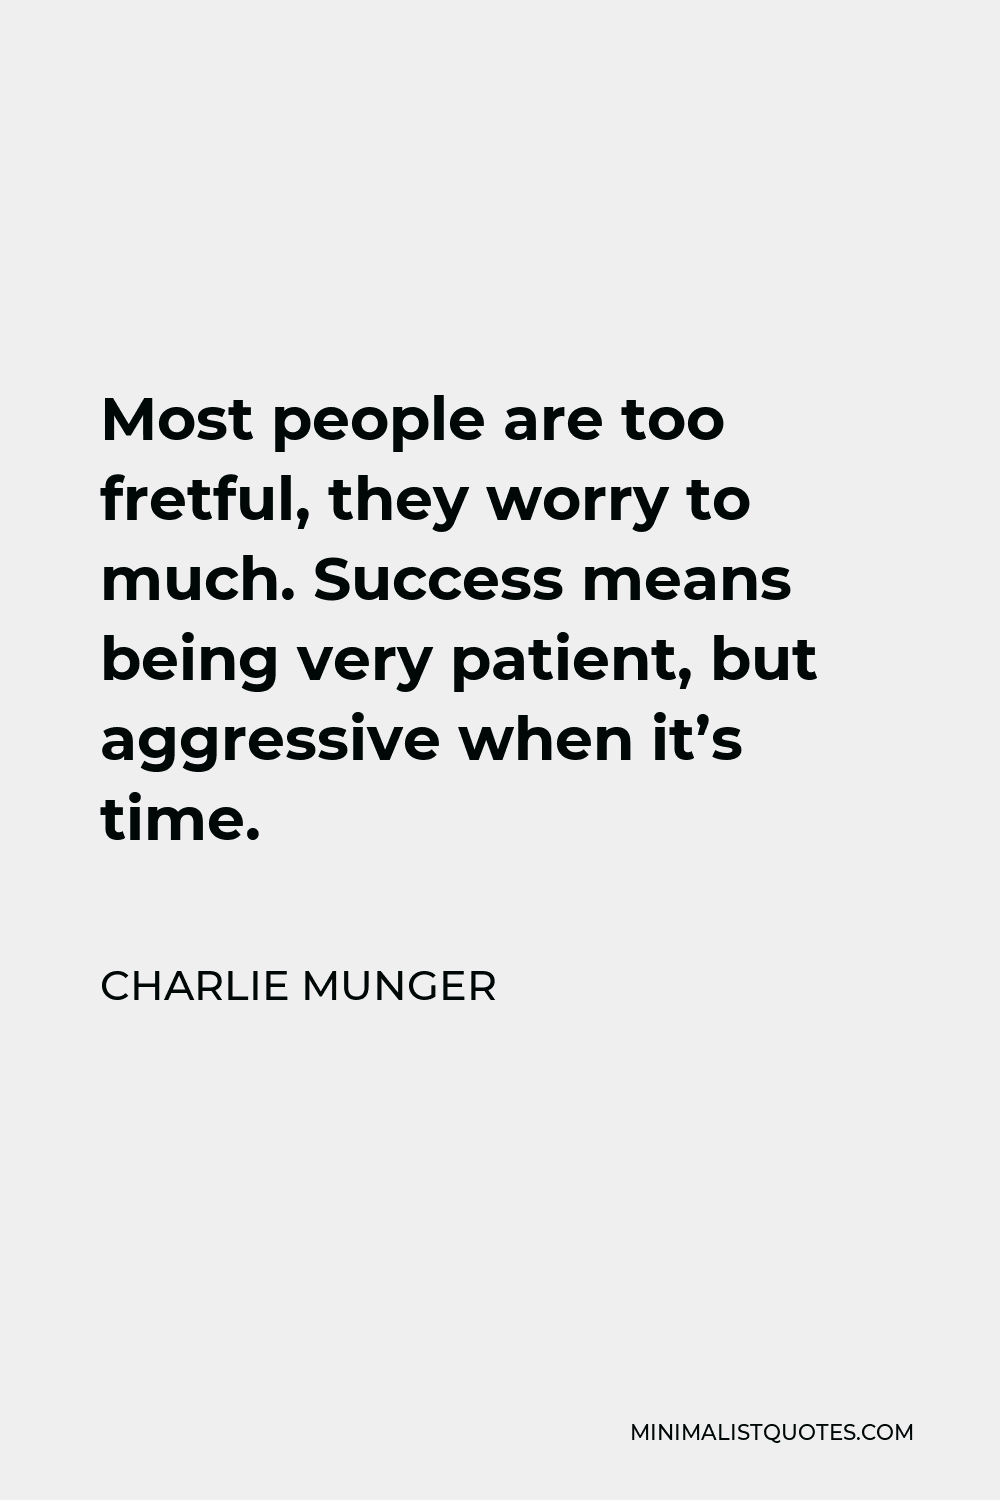 Charlie Munger Quote - Most people are too fretful, they worry to much. Success means being very patient, but aggressive when it’s time.